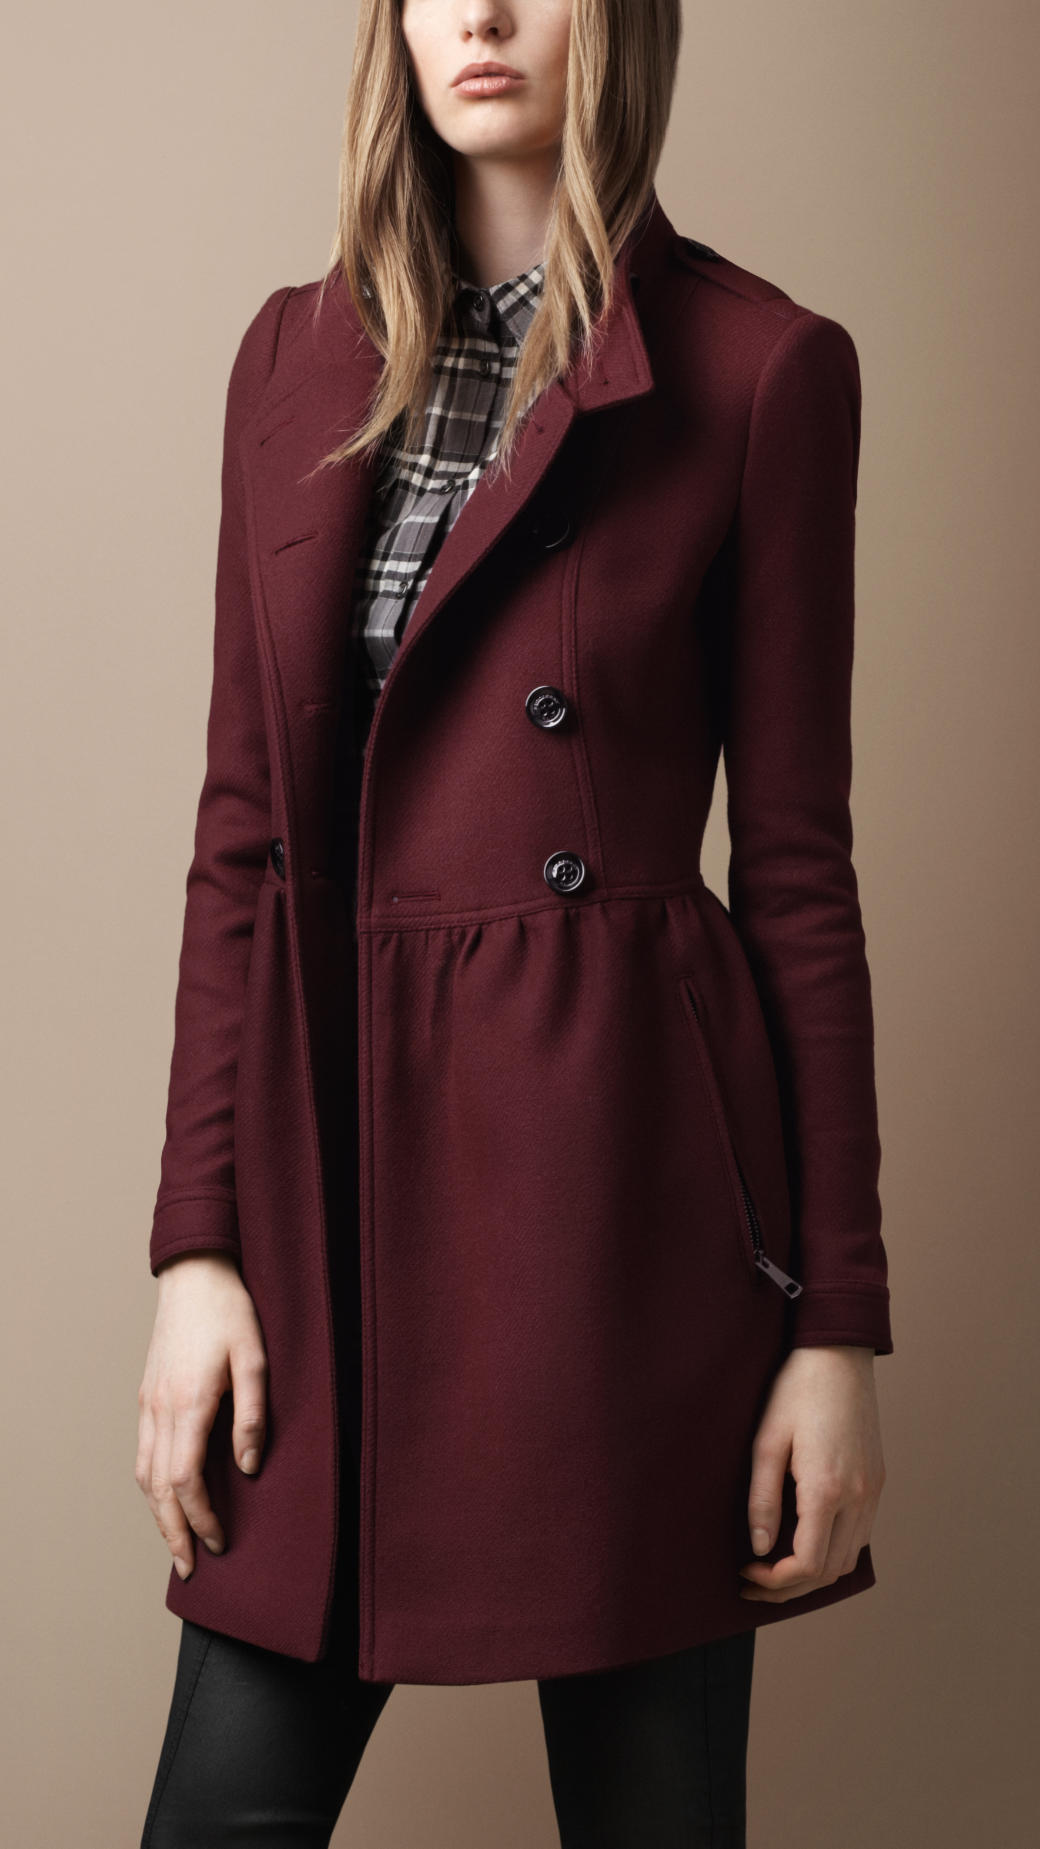 Burberry Brit Wool Twill Dress Coat in Mahogany Red (Red) - Lyst